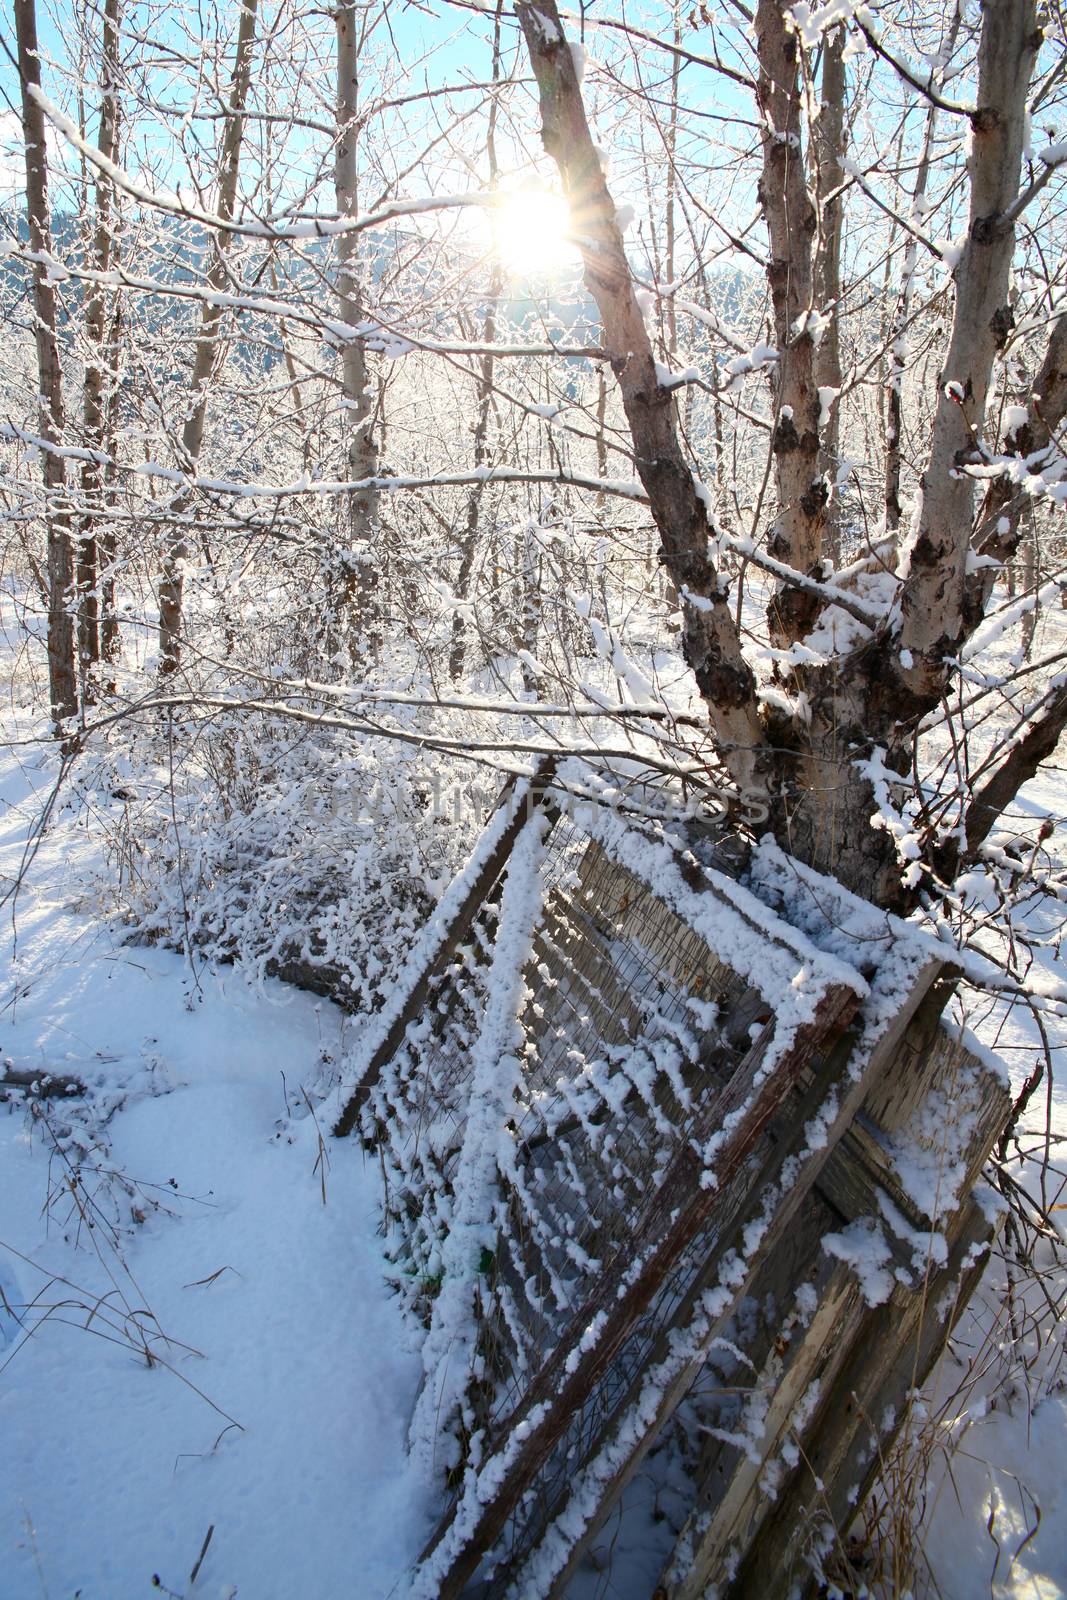 Old gates leaning against a tree, covered in snow